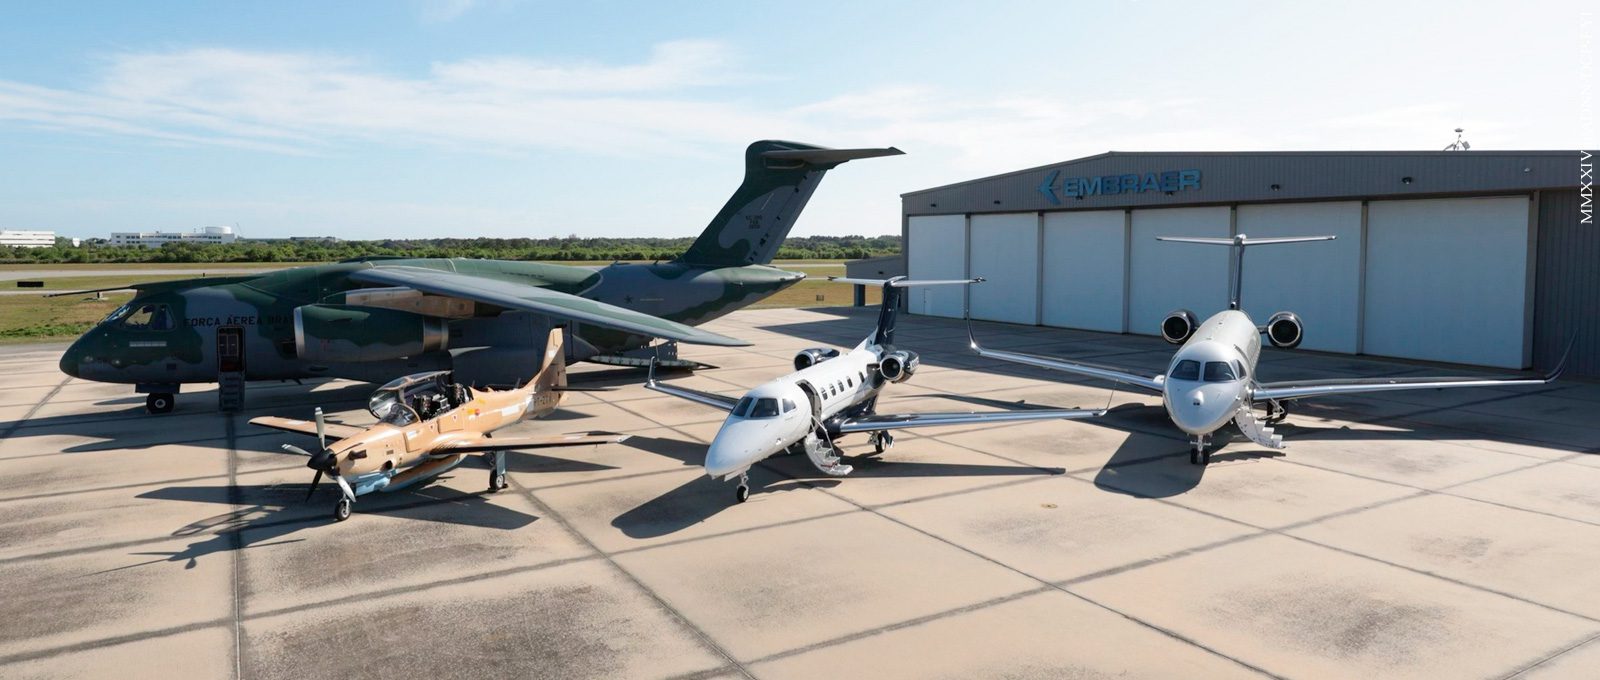 Embraer showcases the C-390 Millennium and A-29 Super Tucano at inaugural visit to Melbourne, Florida